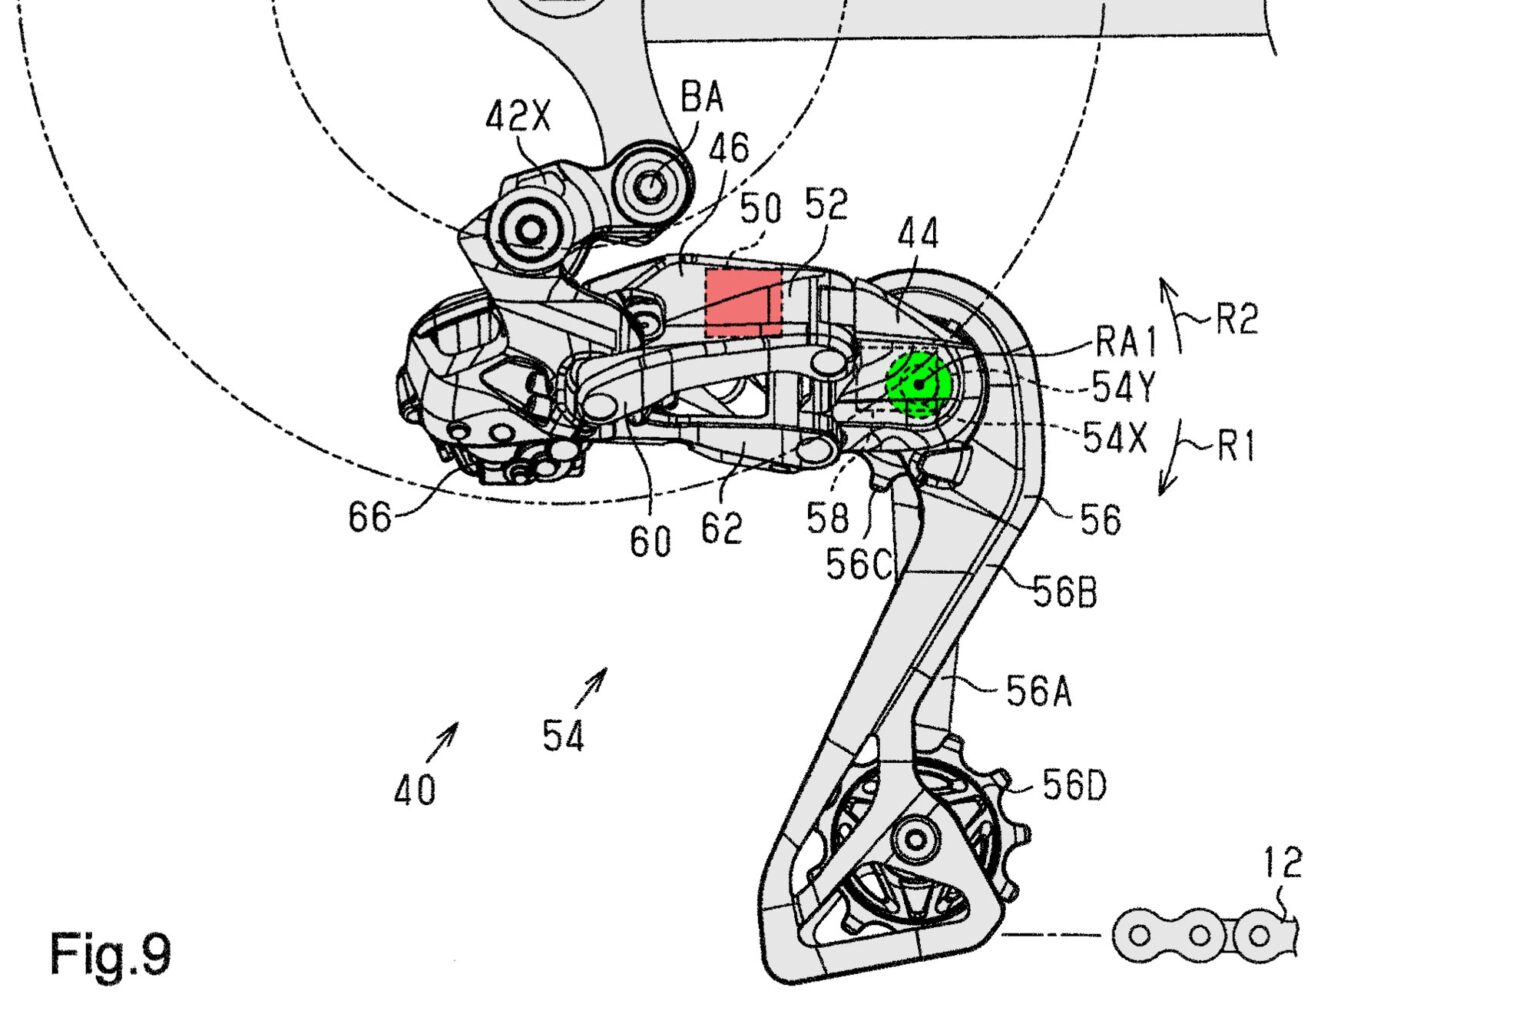 Patent Patrol uncovers fully-wireless next-gen 2x 13-speed Shimano Dura-Ace Di2 drivetrain with removable batteries and more wild tech, road clutch